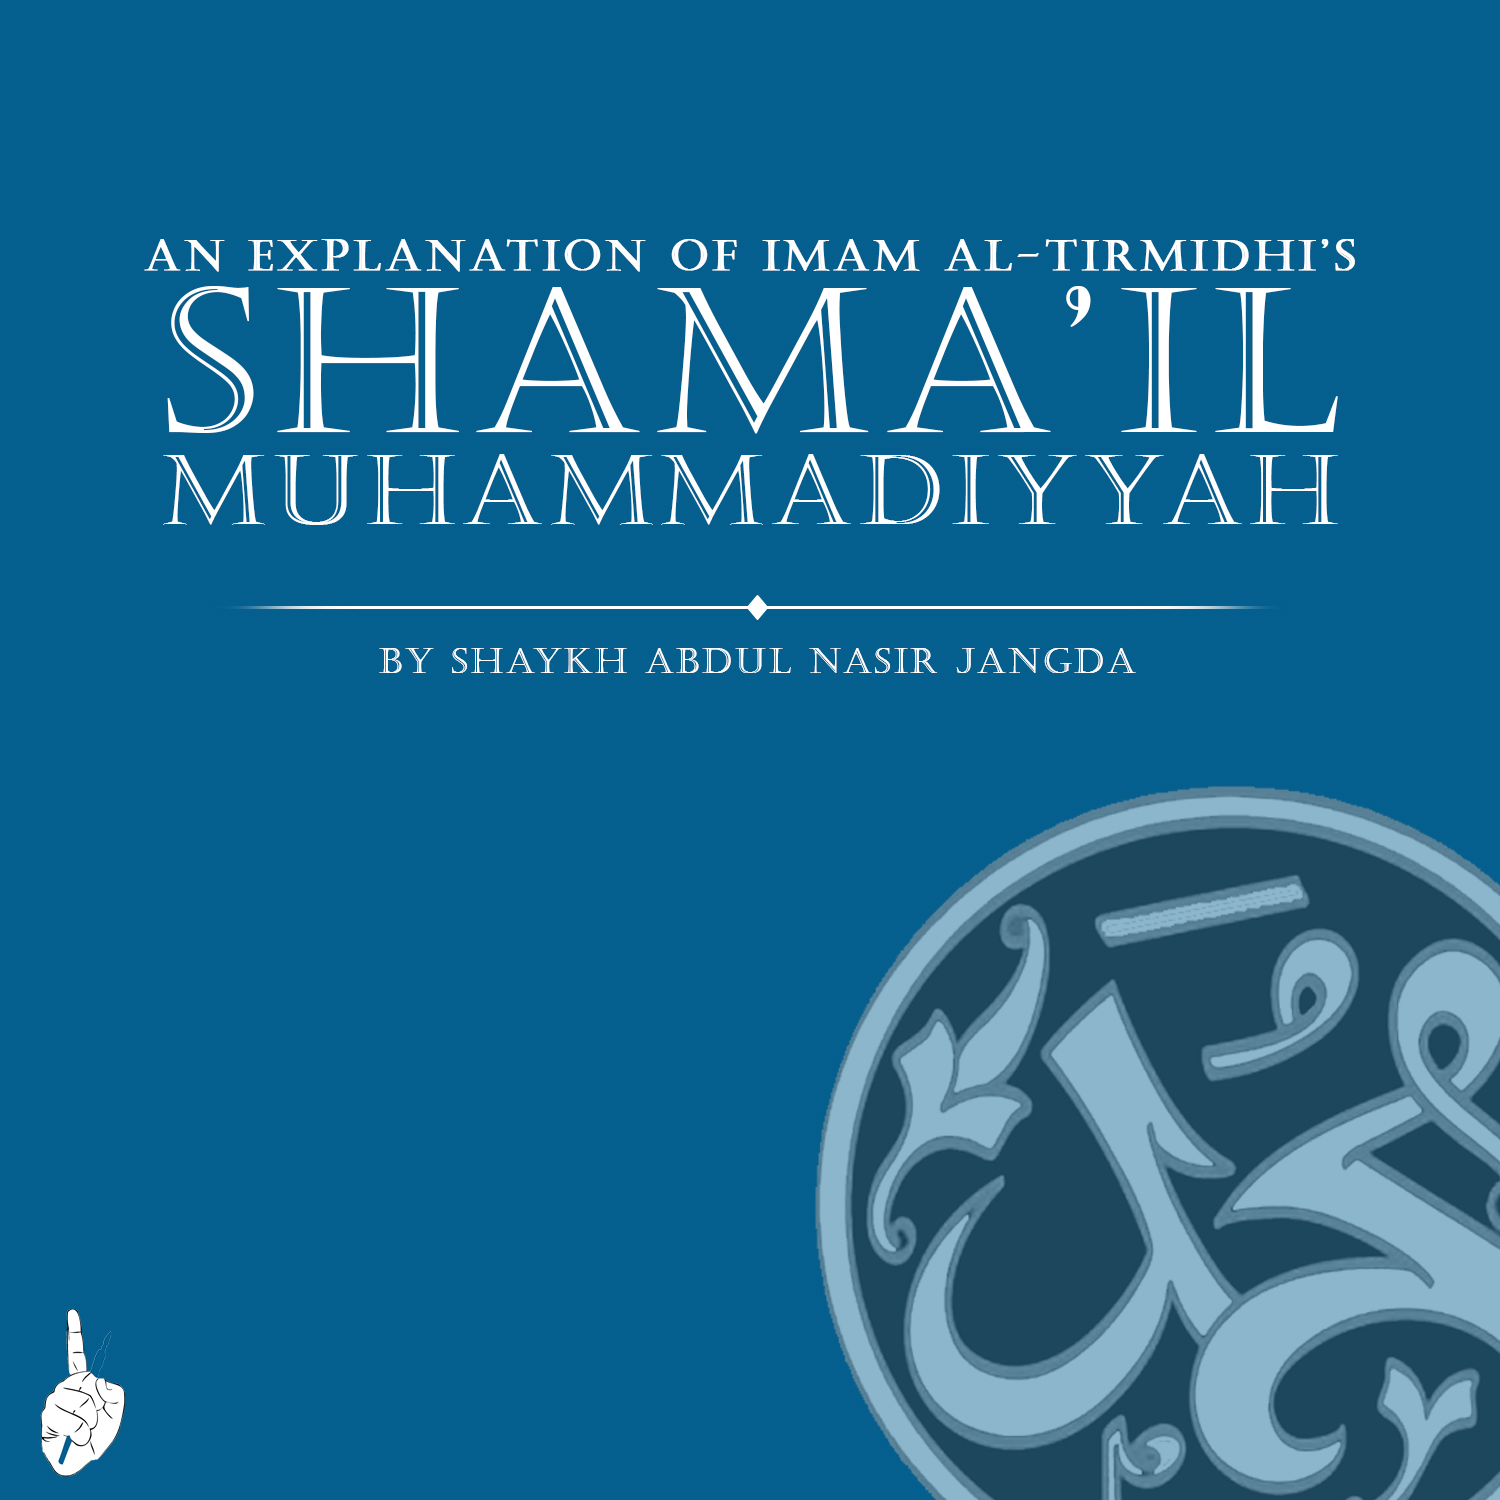 Shama’il Muhammadiyyah: EP1 – The Physical Features of the Prophet Part 1